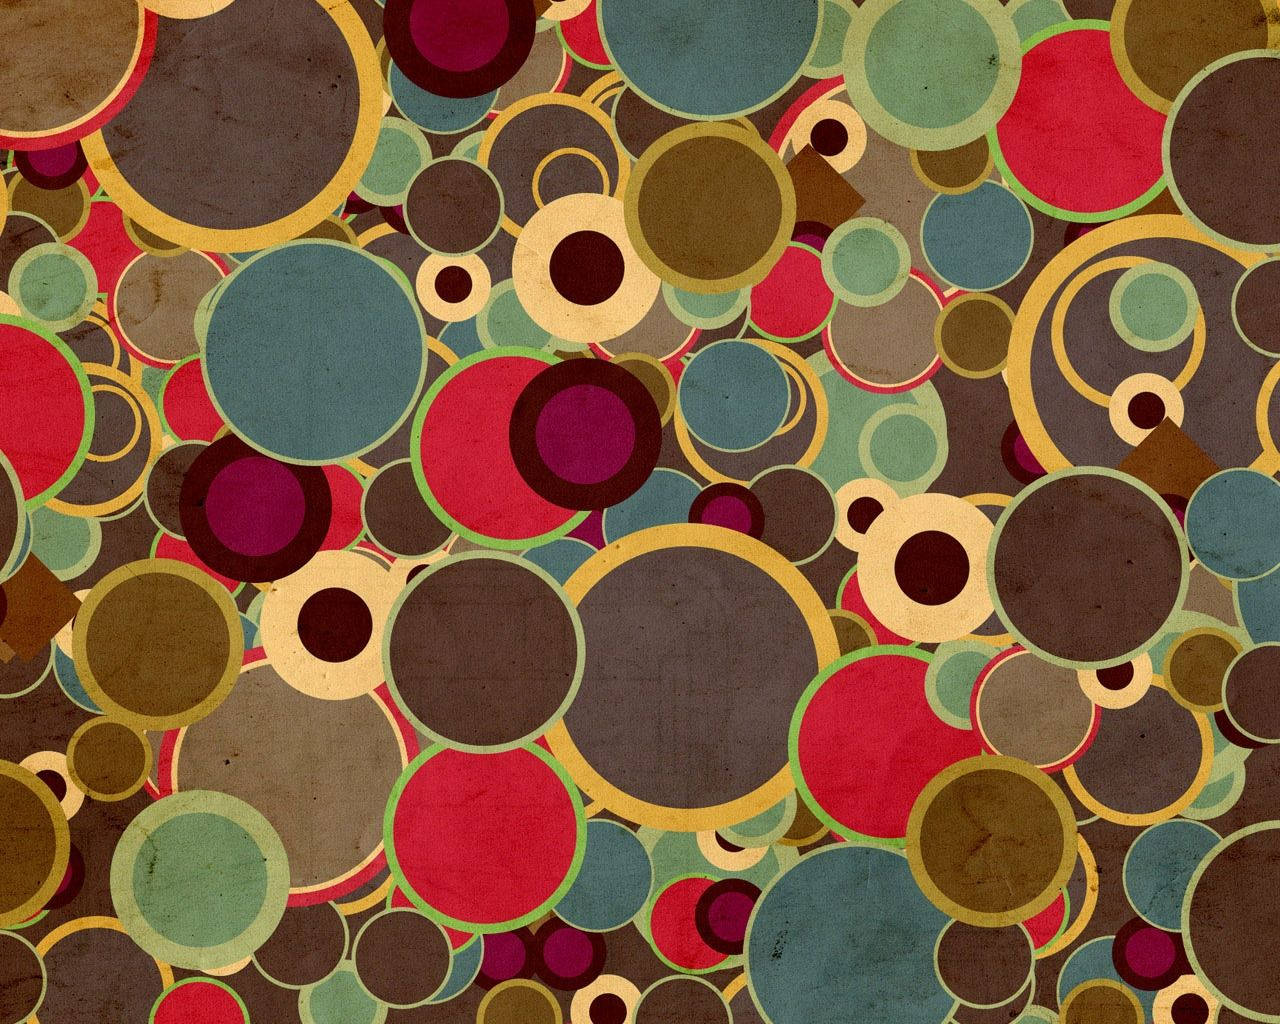 Vintage 70s With Colorful Circles Wallpaper